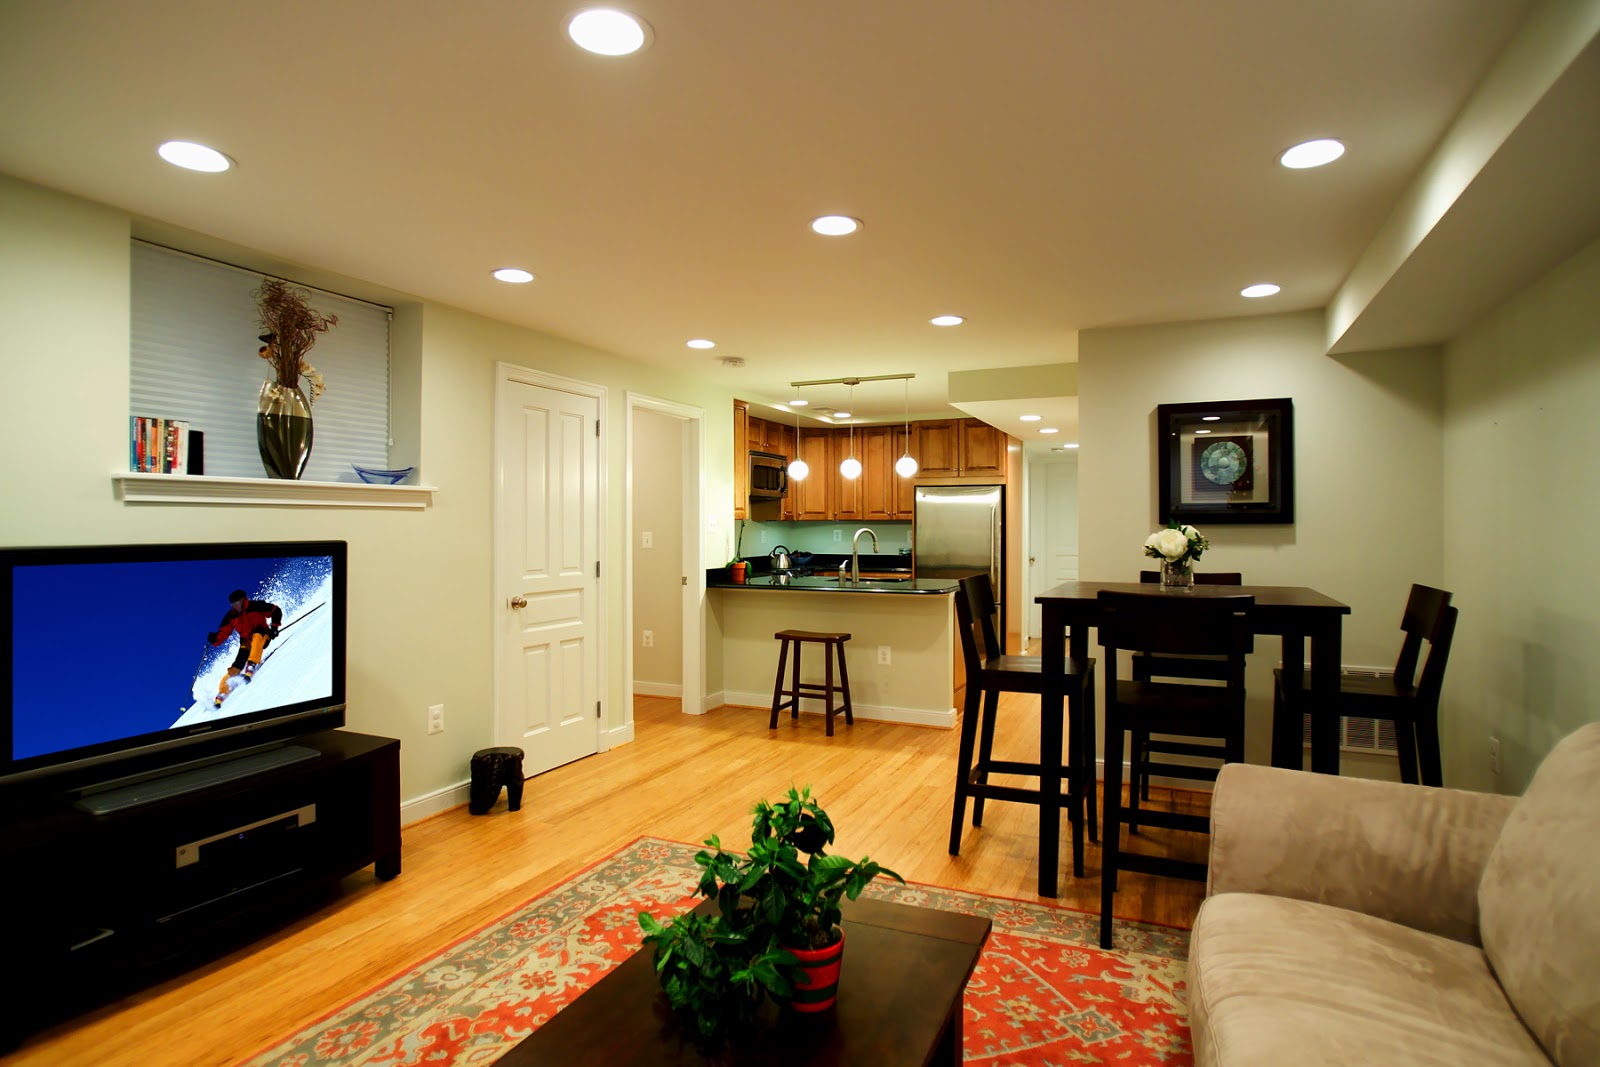 Finished Basement Traditional Magnificent Minimalist Finished Basement Ideas With Traditional Design Using Wooden Flooring And White Wall Color Ideas Basement Finished Basement Ideas With Decorative Style